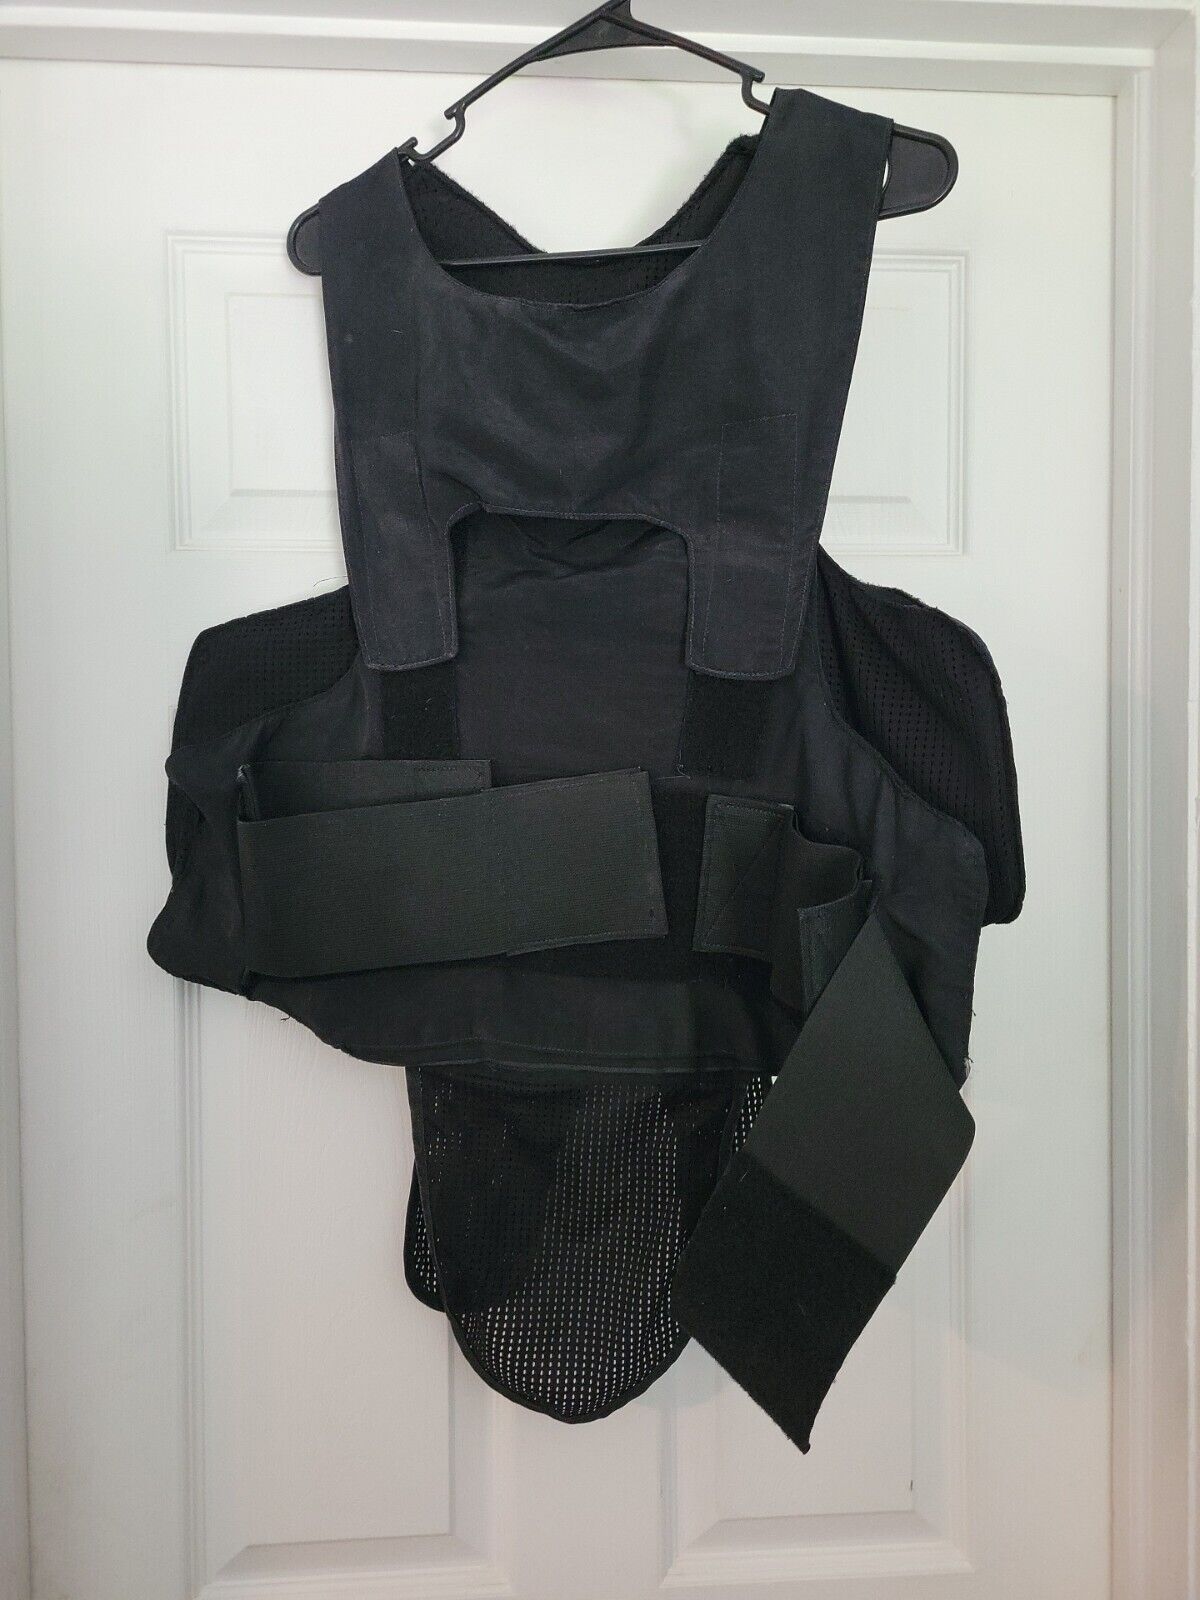 KDH Fearless 3 Plate Carrier, NO Armor